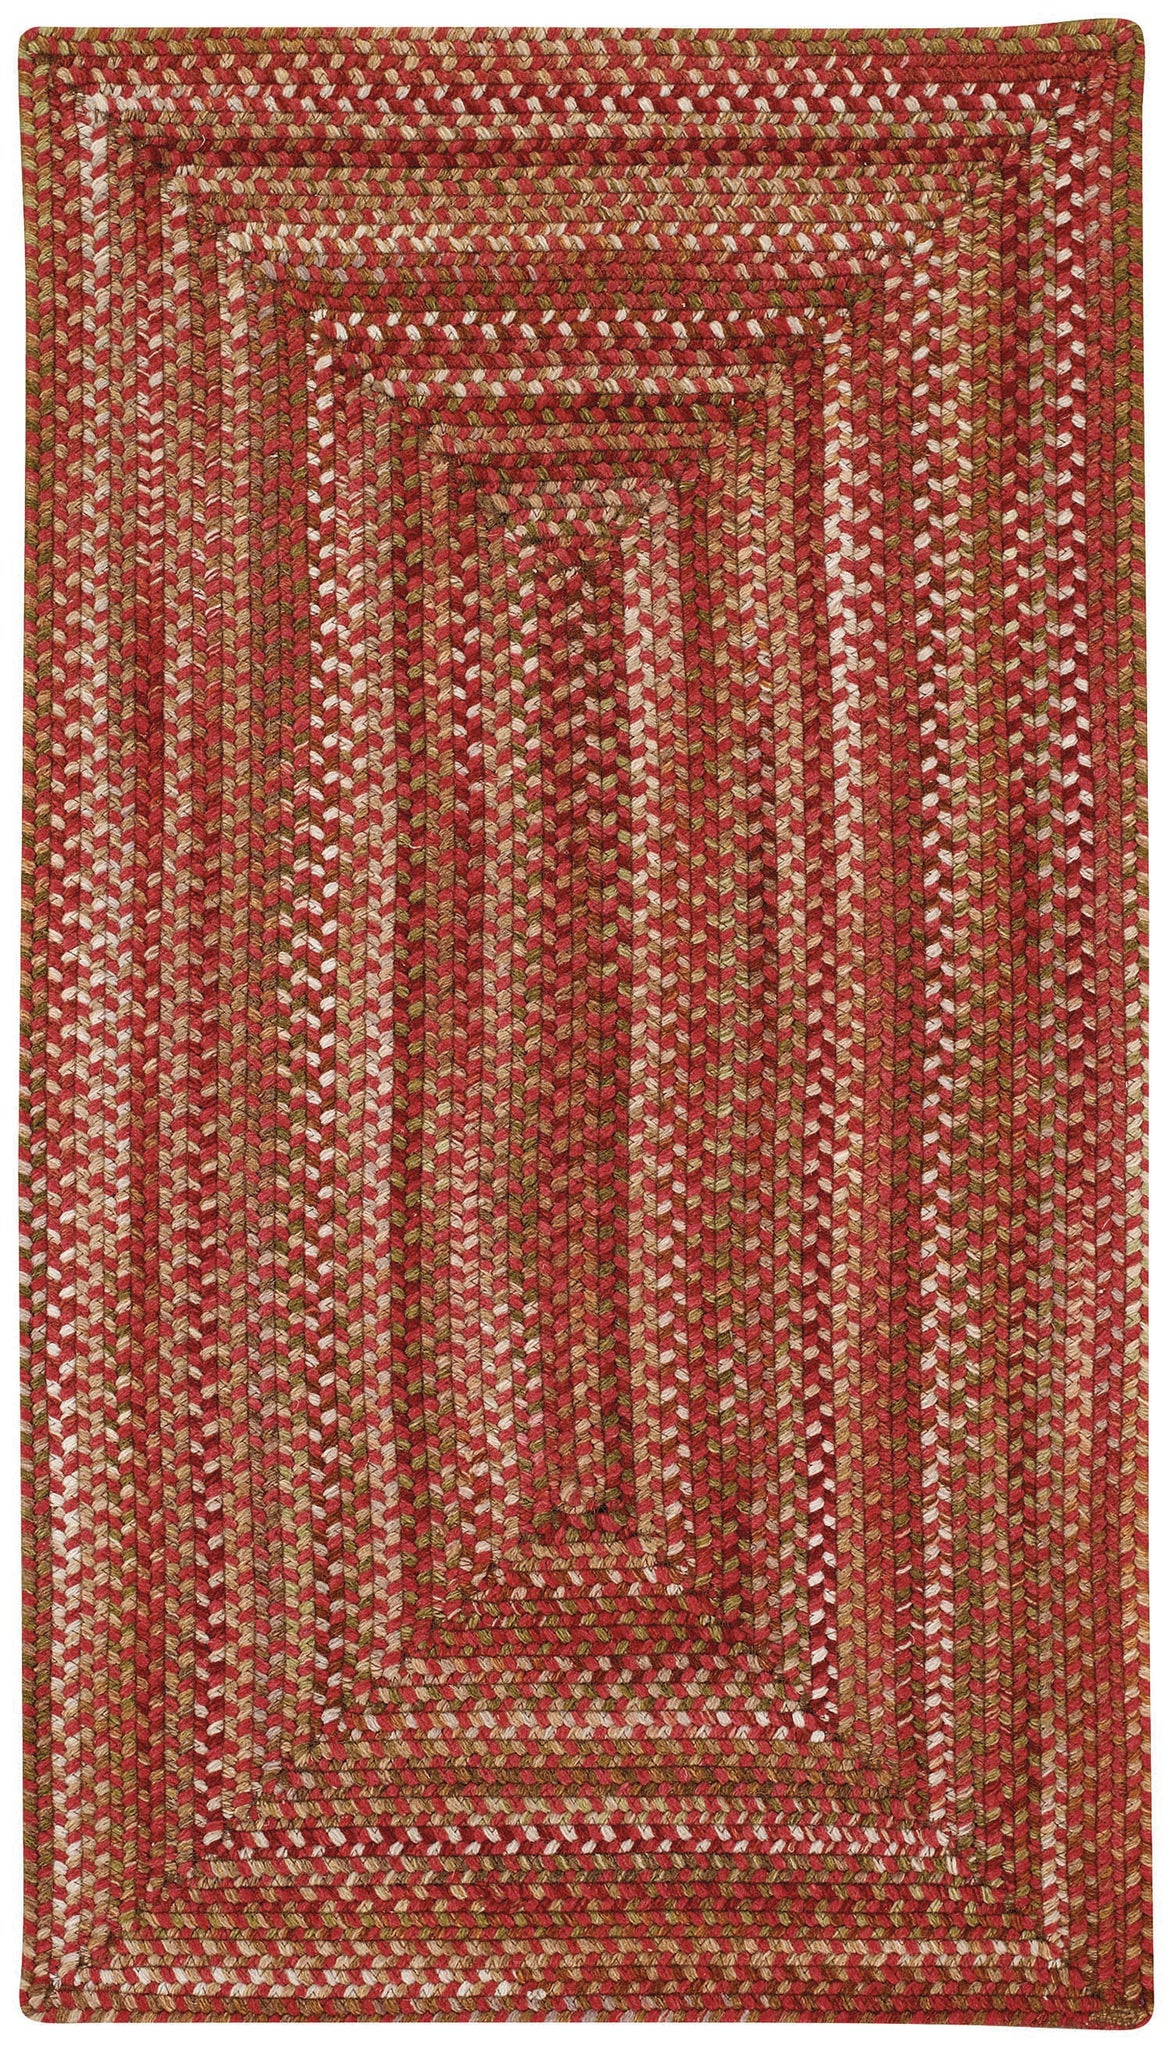 Capel Manchester 0048 Redwood 500 Area Rug main image